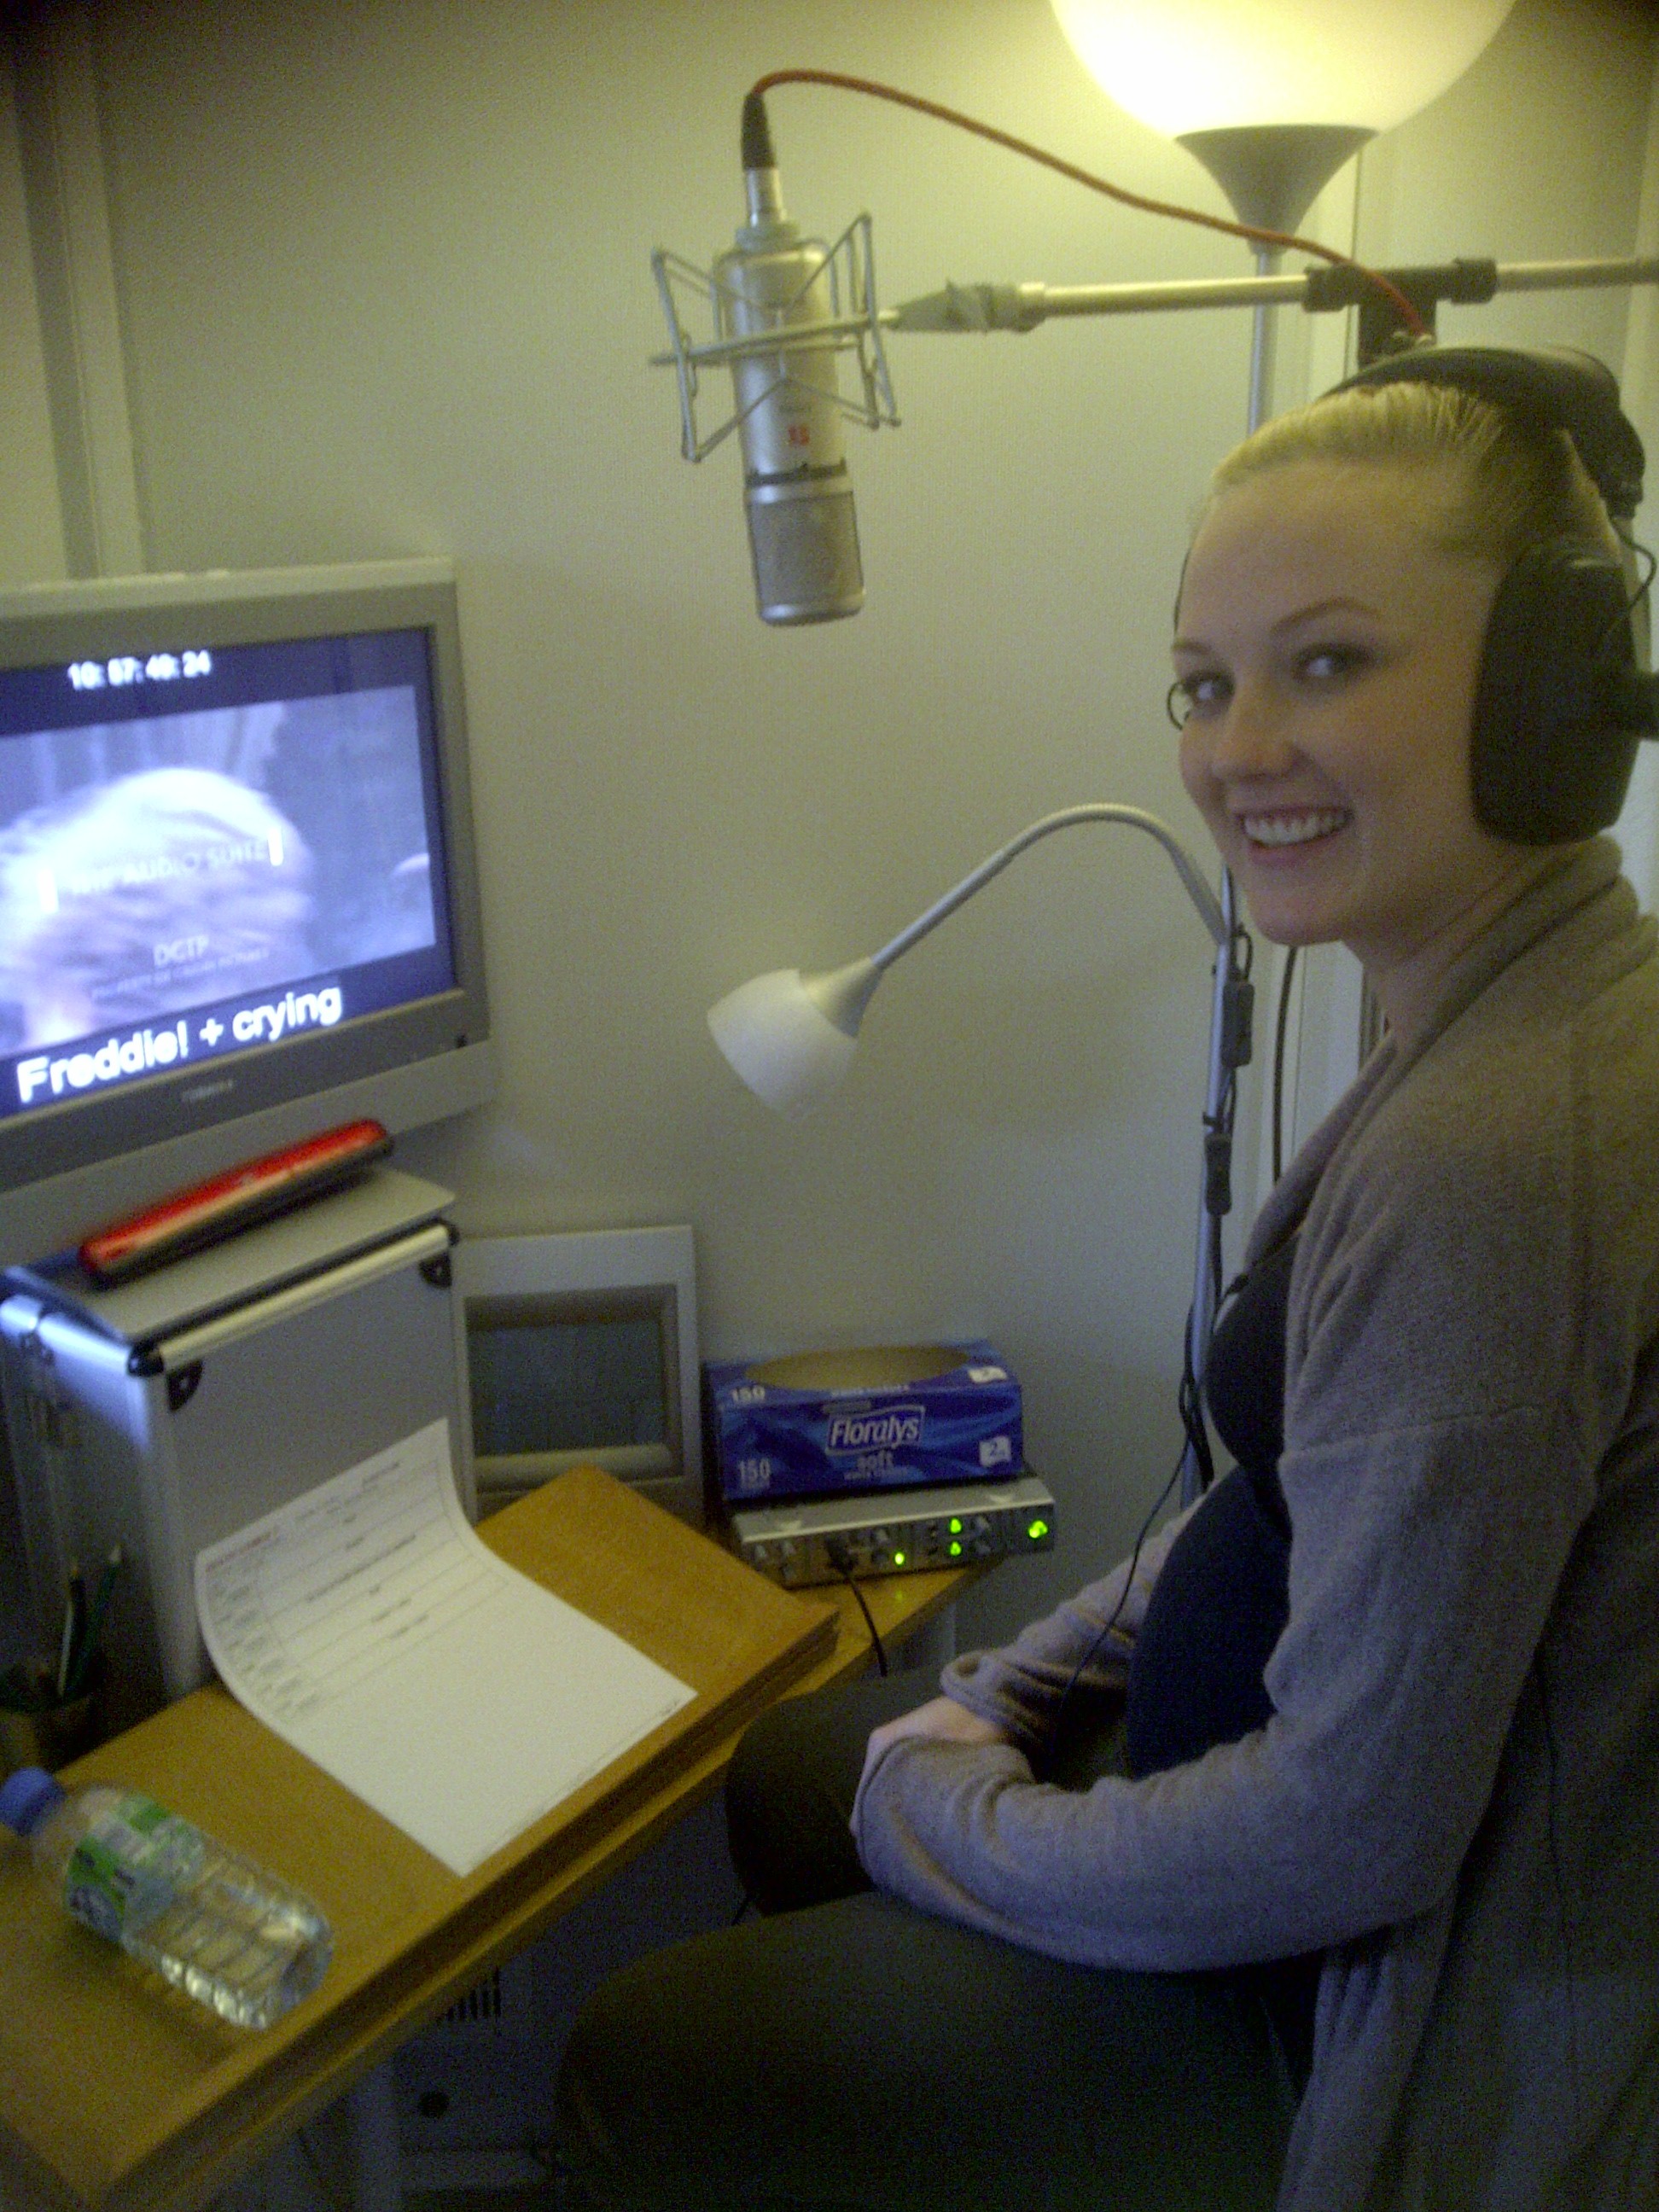 Nichola Burley recording ADR at The Audio Suite for the Origin Pictures drama 'Death Comes To Pemberley'; October 29th, 2013.